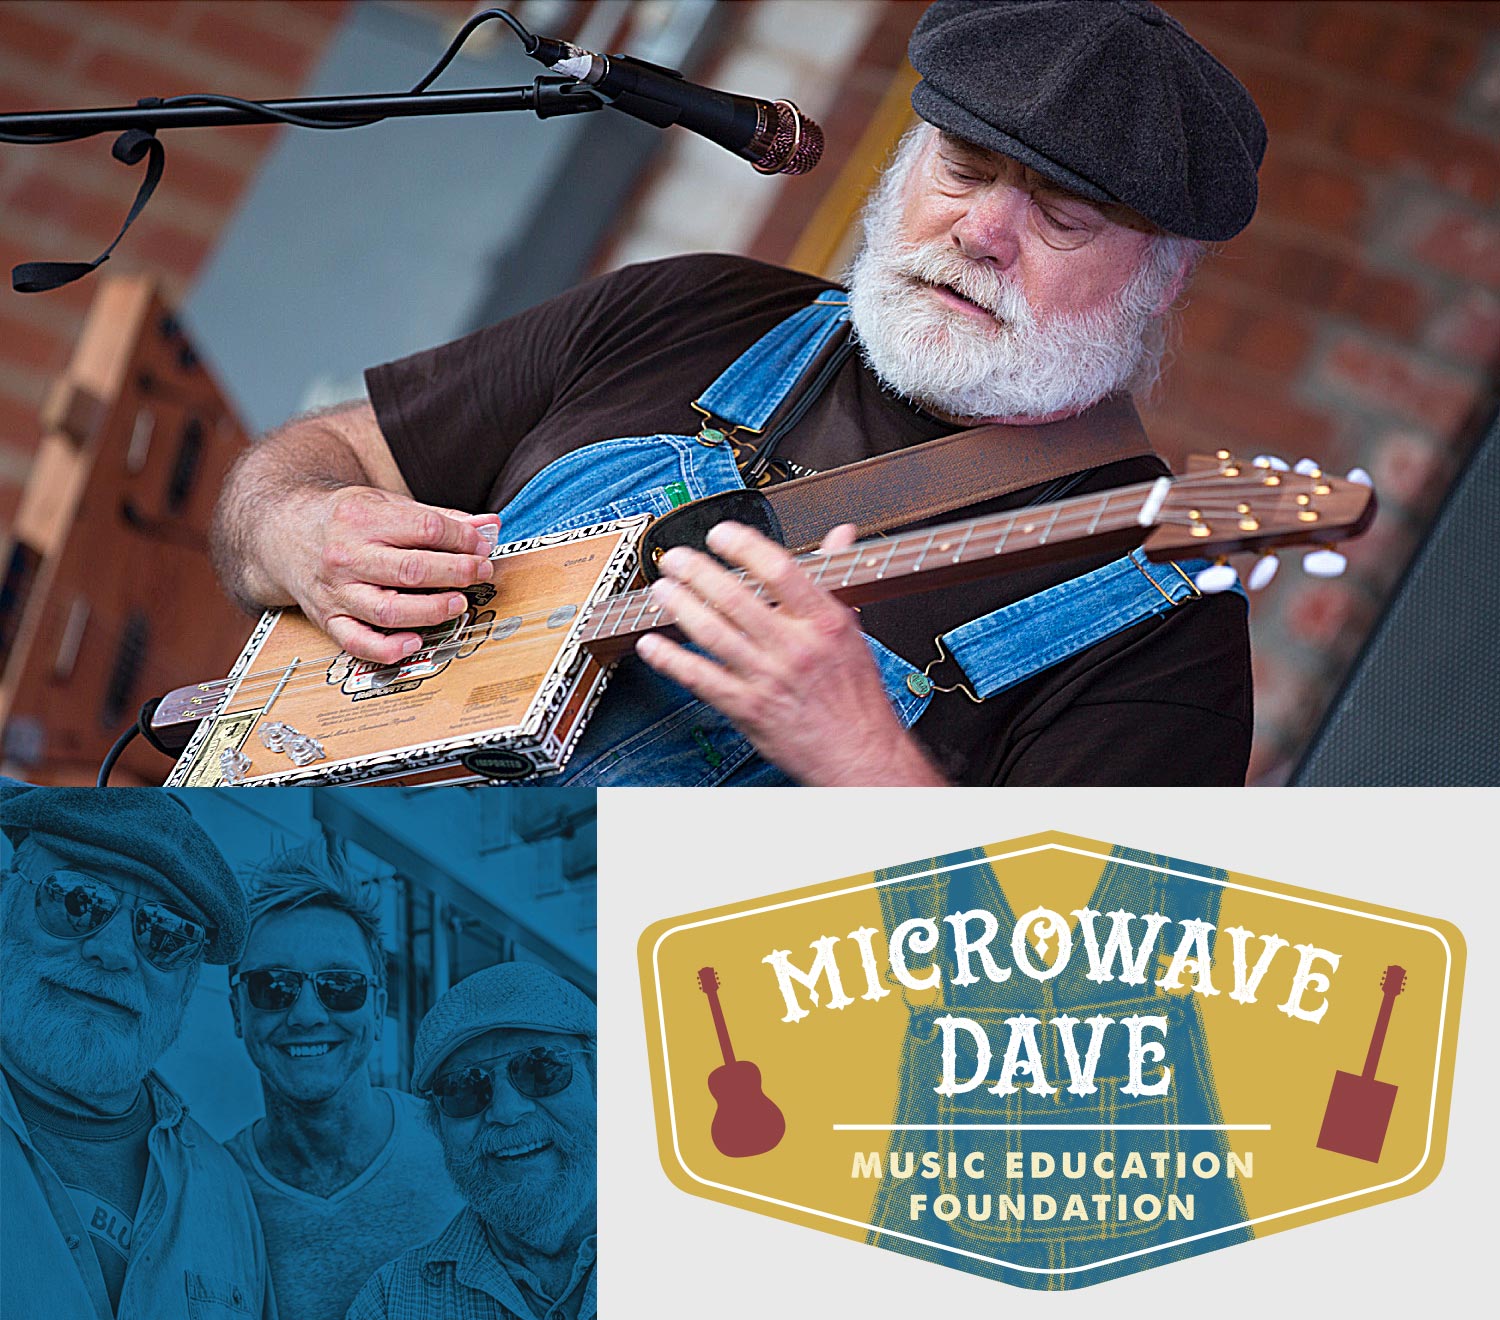 Microwave Dave Music Education Foundation